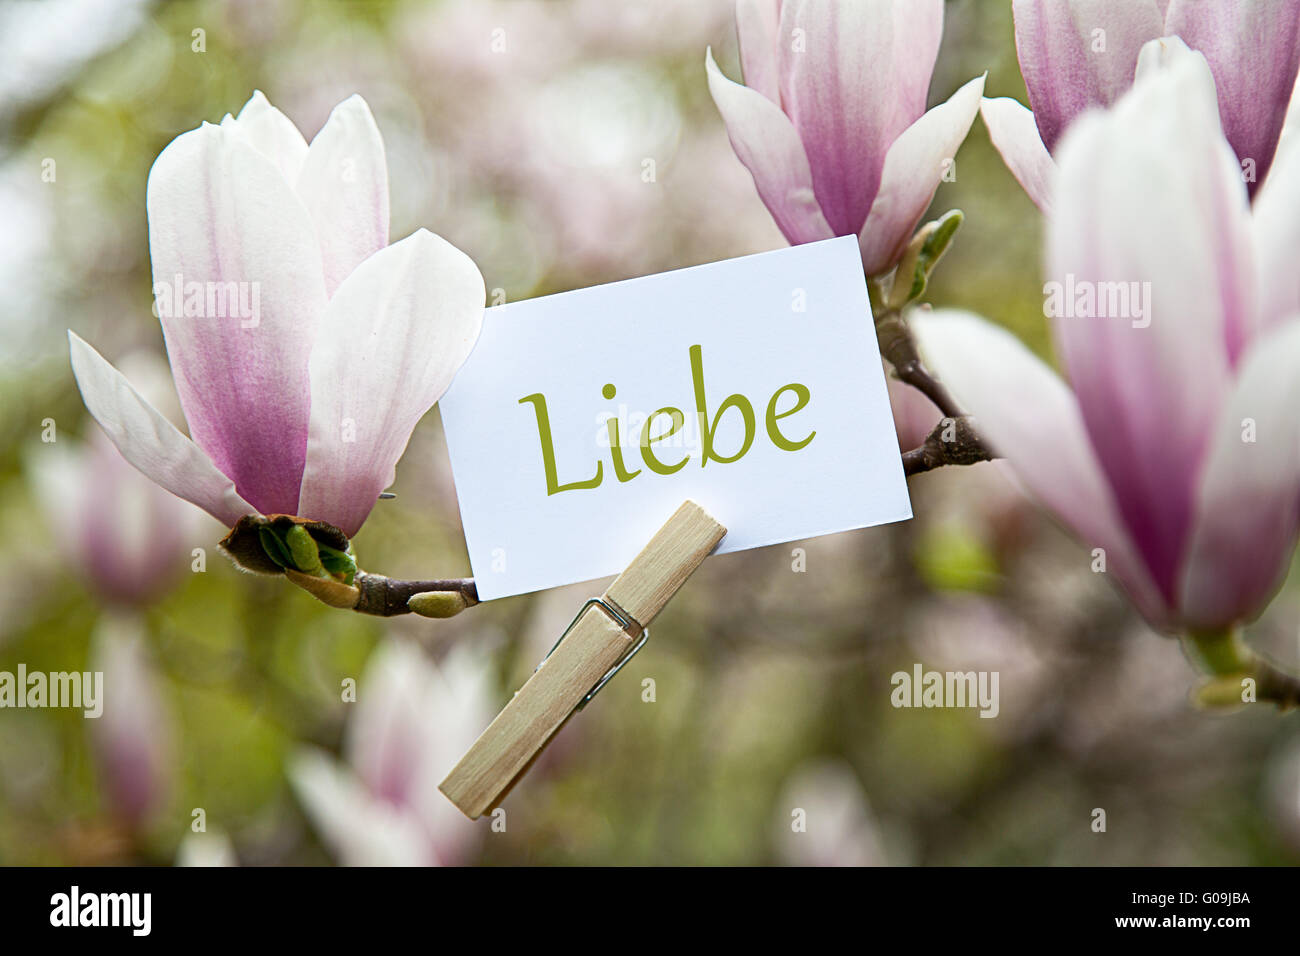 Liebe attached to a blossoming magnolia tree Stock Photo